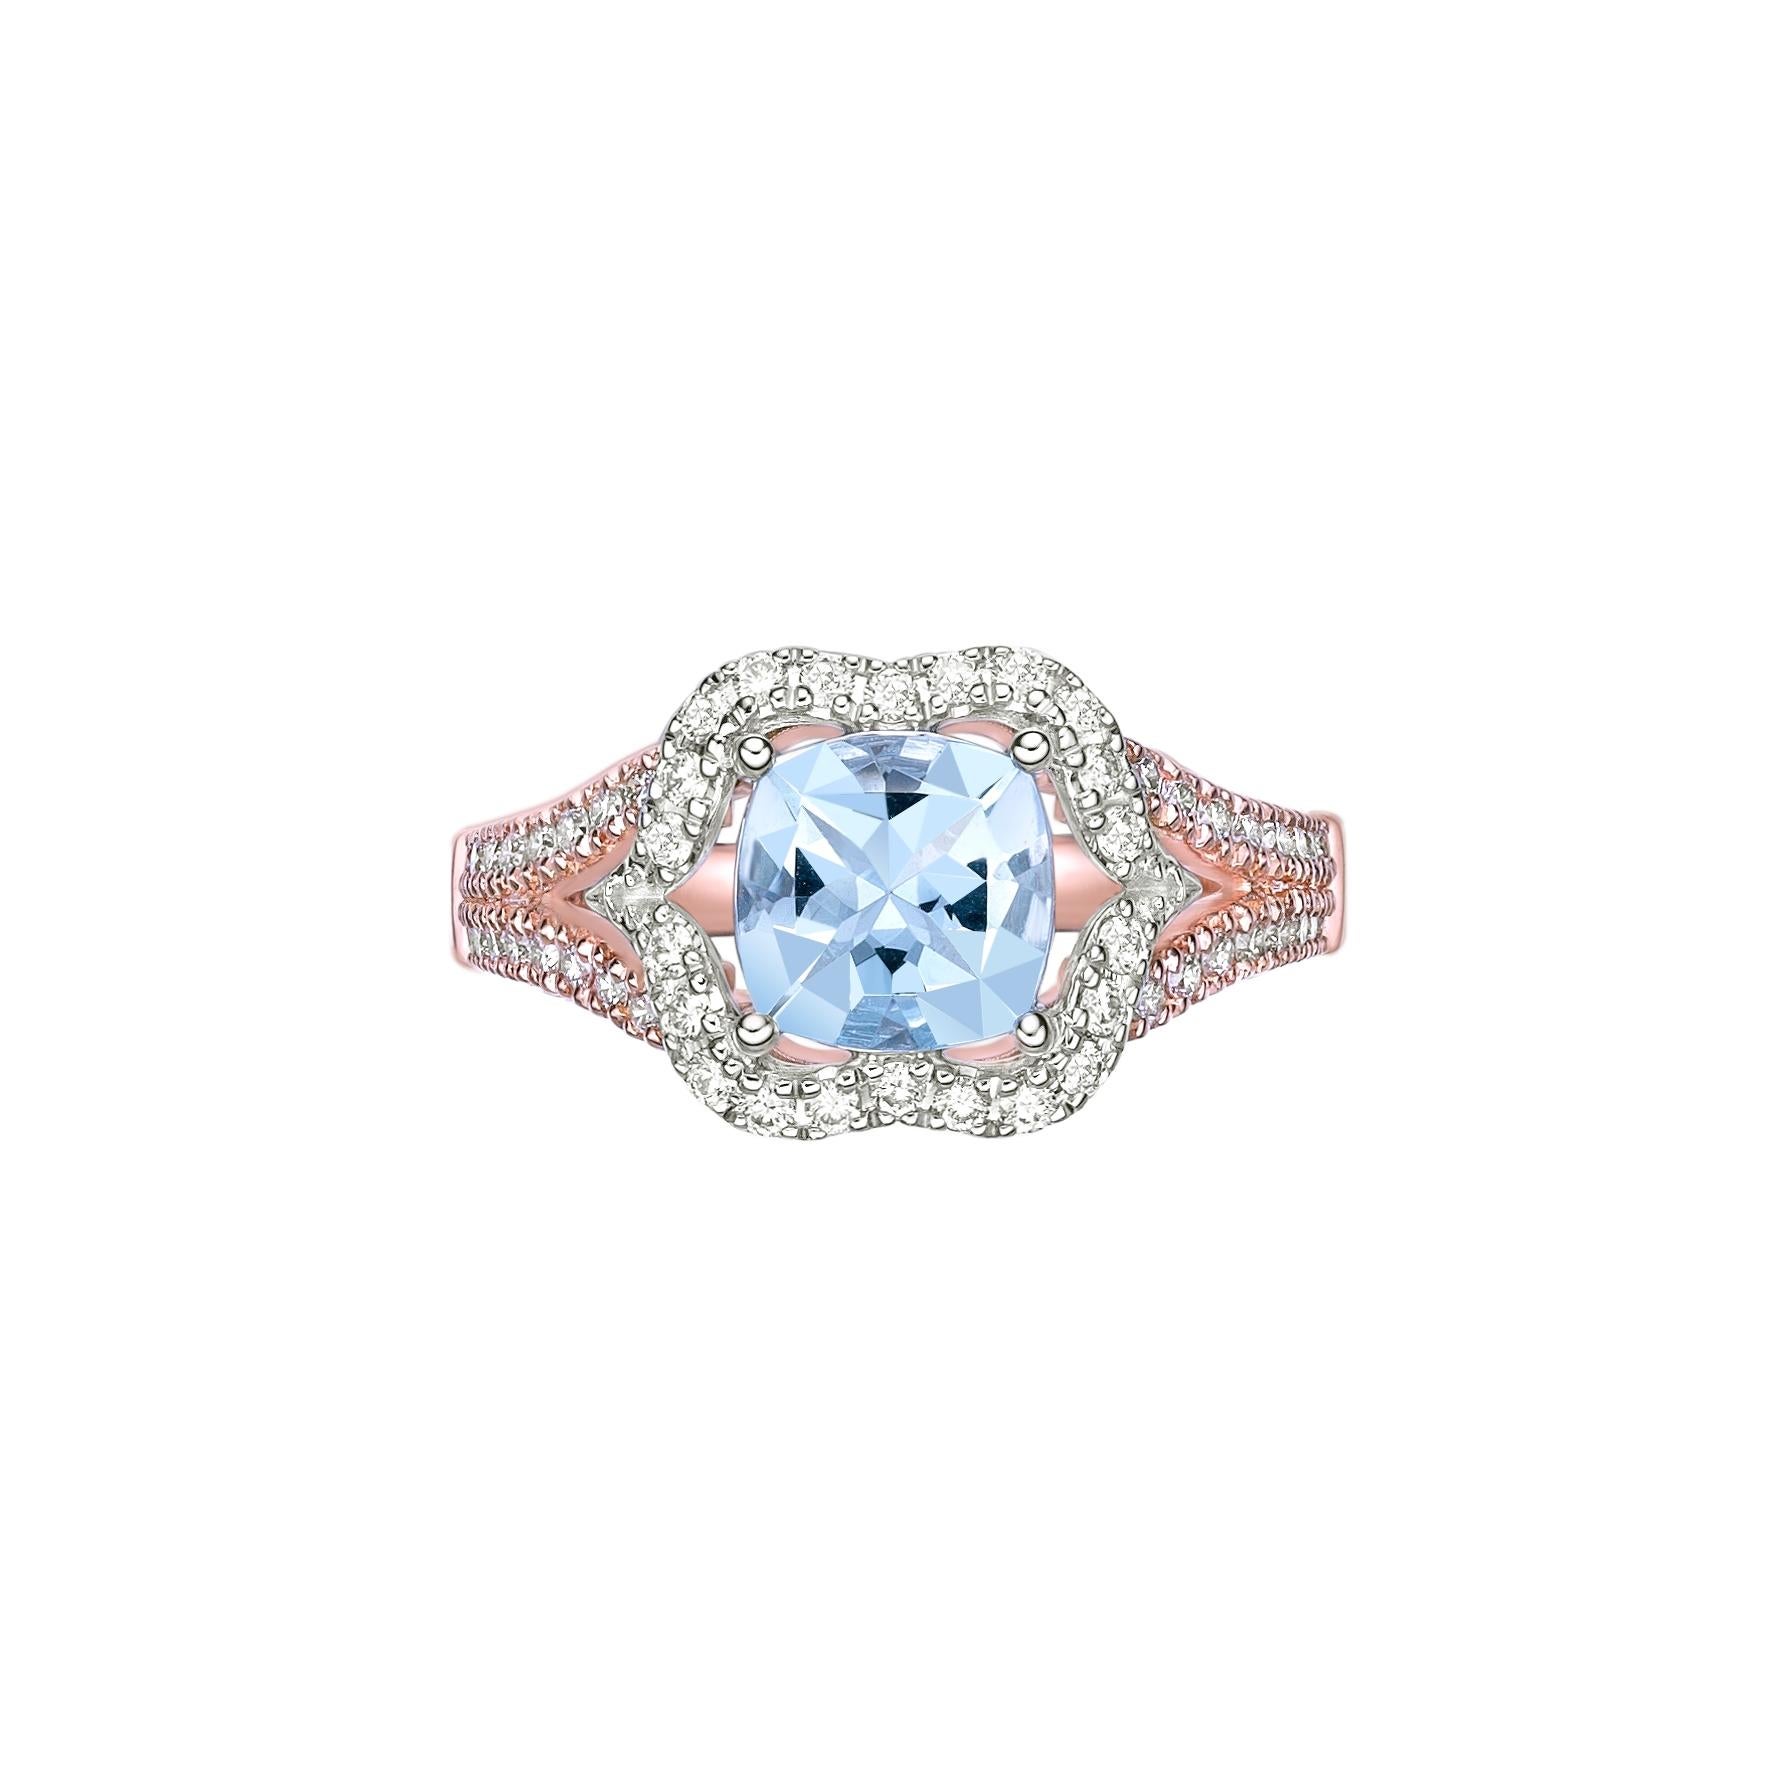 Contemporary 1.18 Carat Aquamarine Fancy Ring in 18Karat White Rose Gold with White Diamond. For Sale